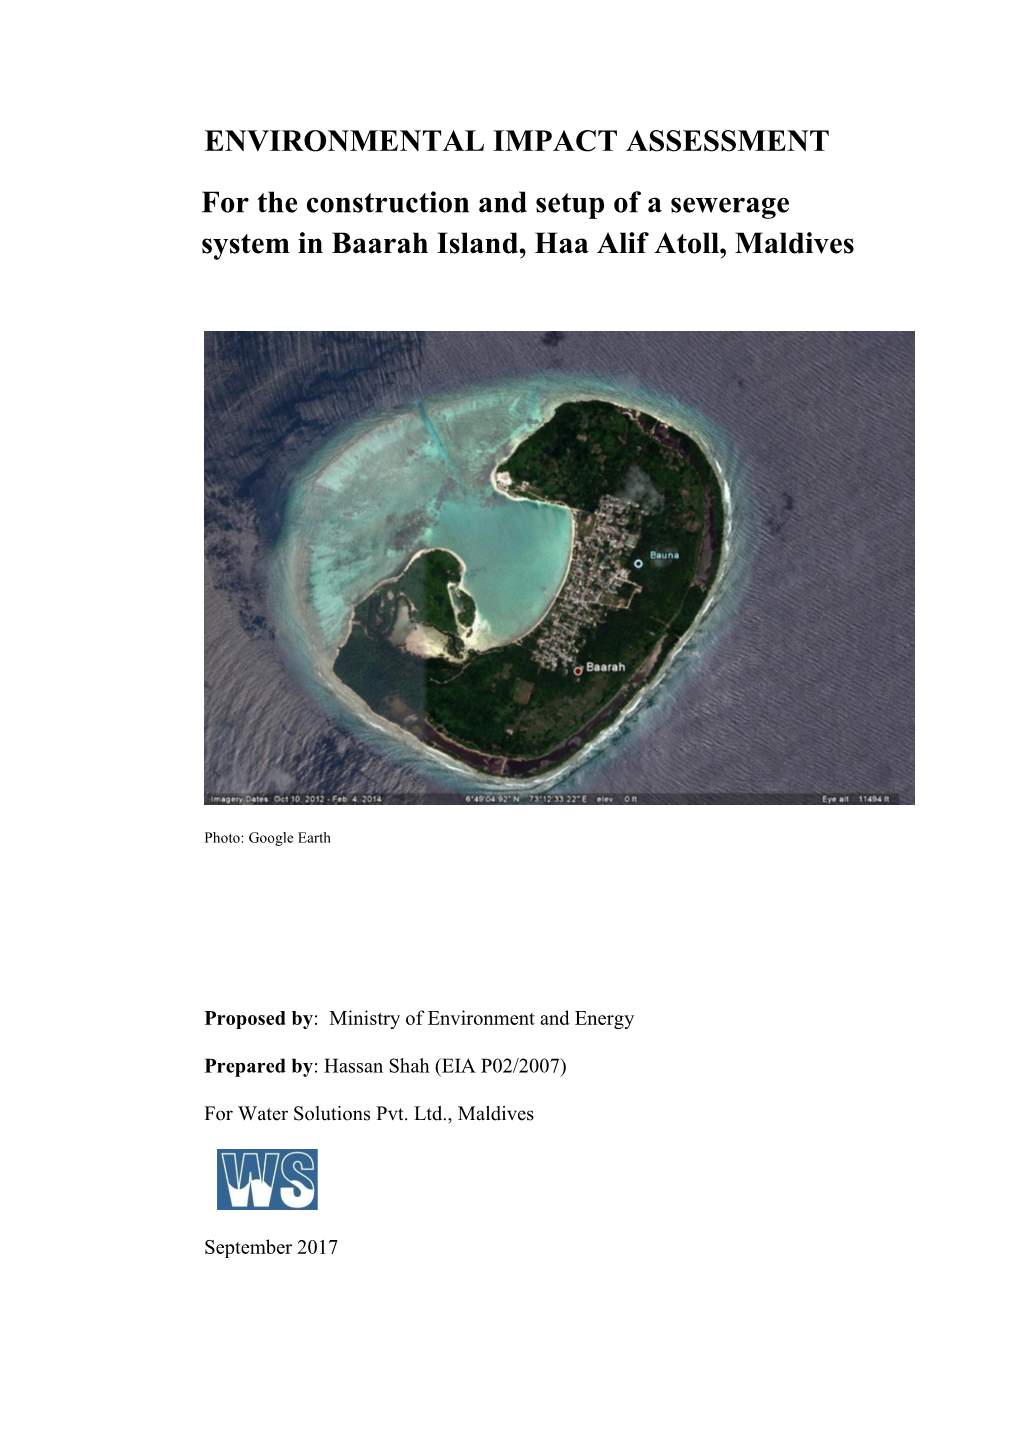 ENVIRONMENTAL IMPACT ASSESSMENT for the Construction and Setup of a Sewerage System in Baarah Island, Haa Alif Atoll, Maldives